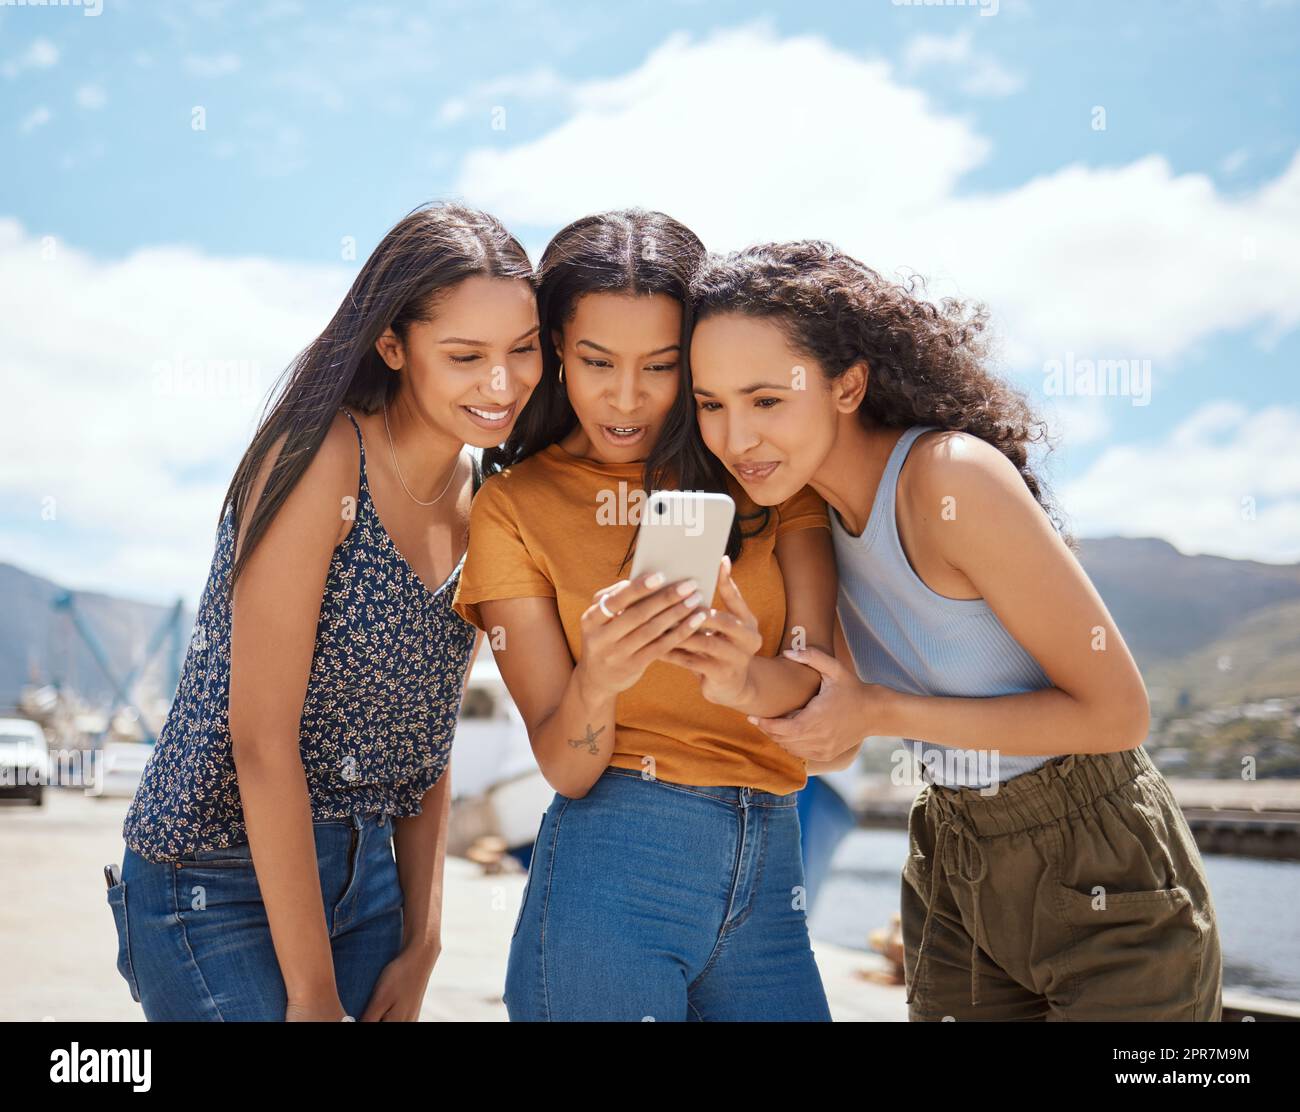 Lets watch it together. a group of women looking at something on a cellphone together outdoors. Stock Photo